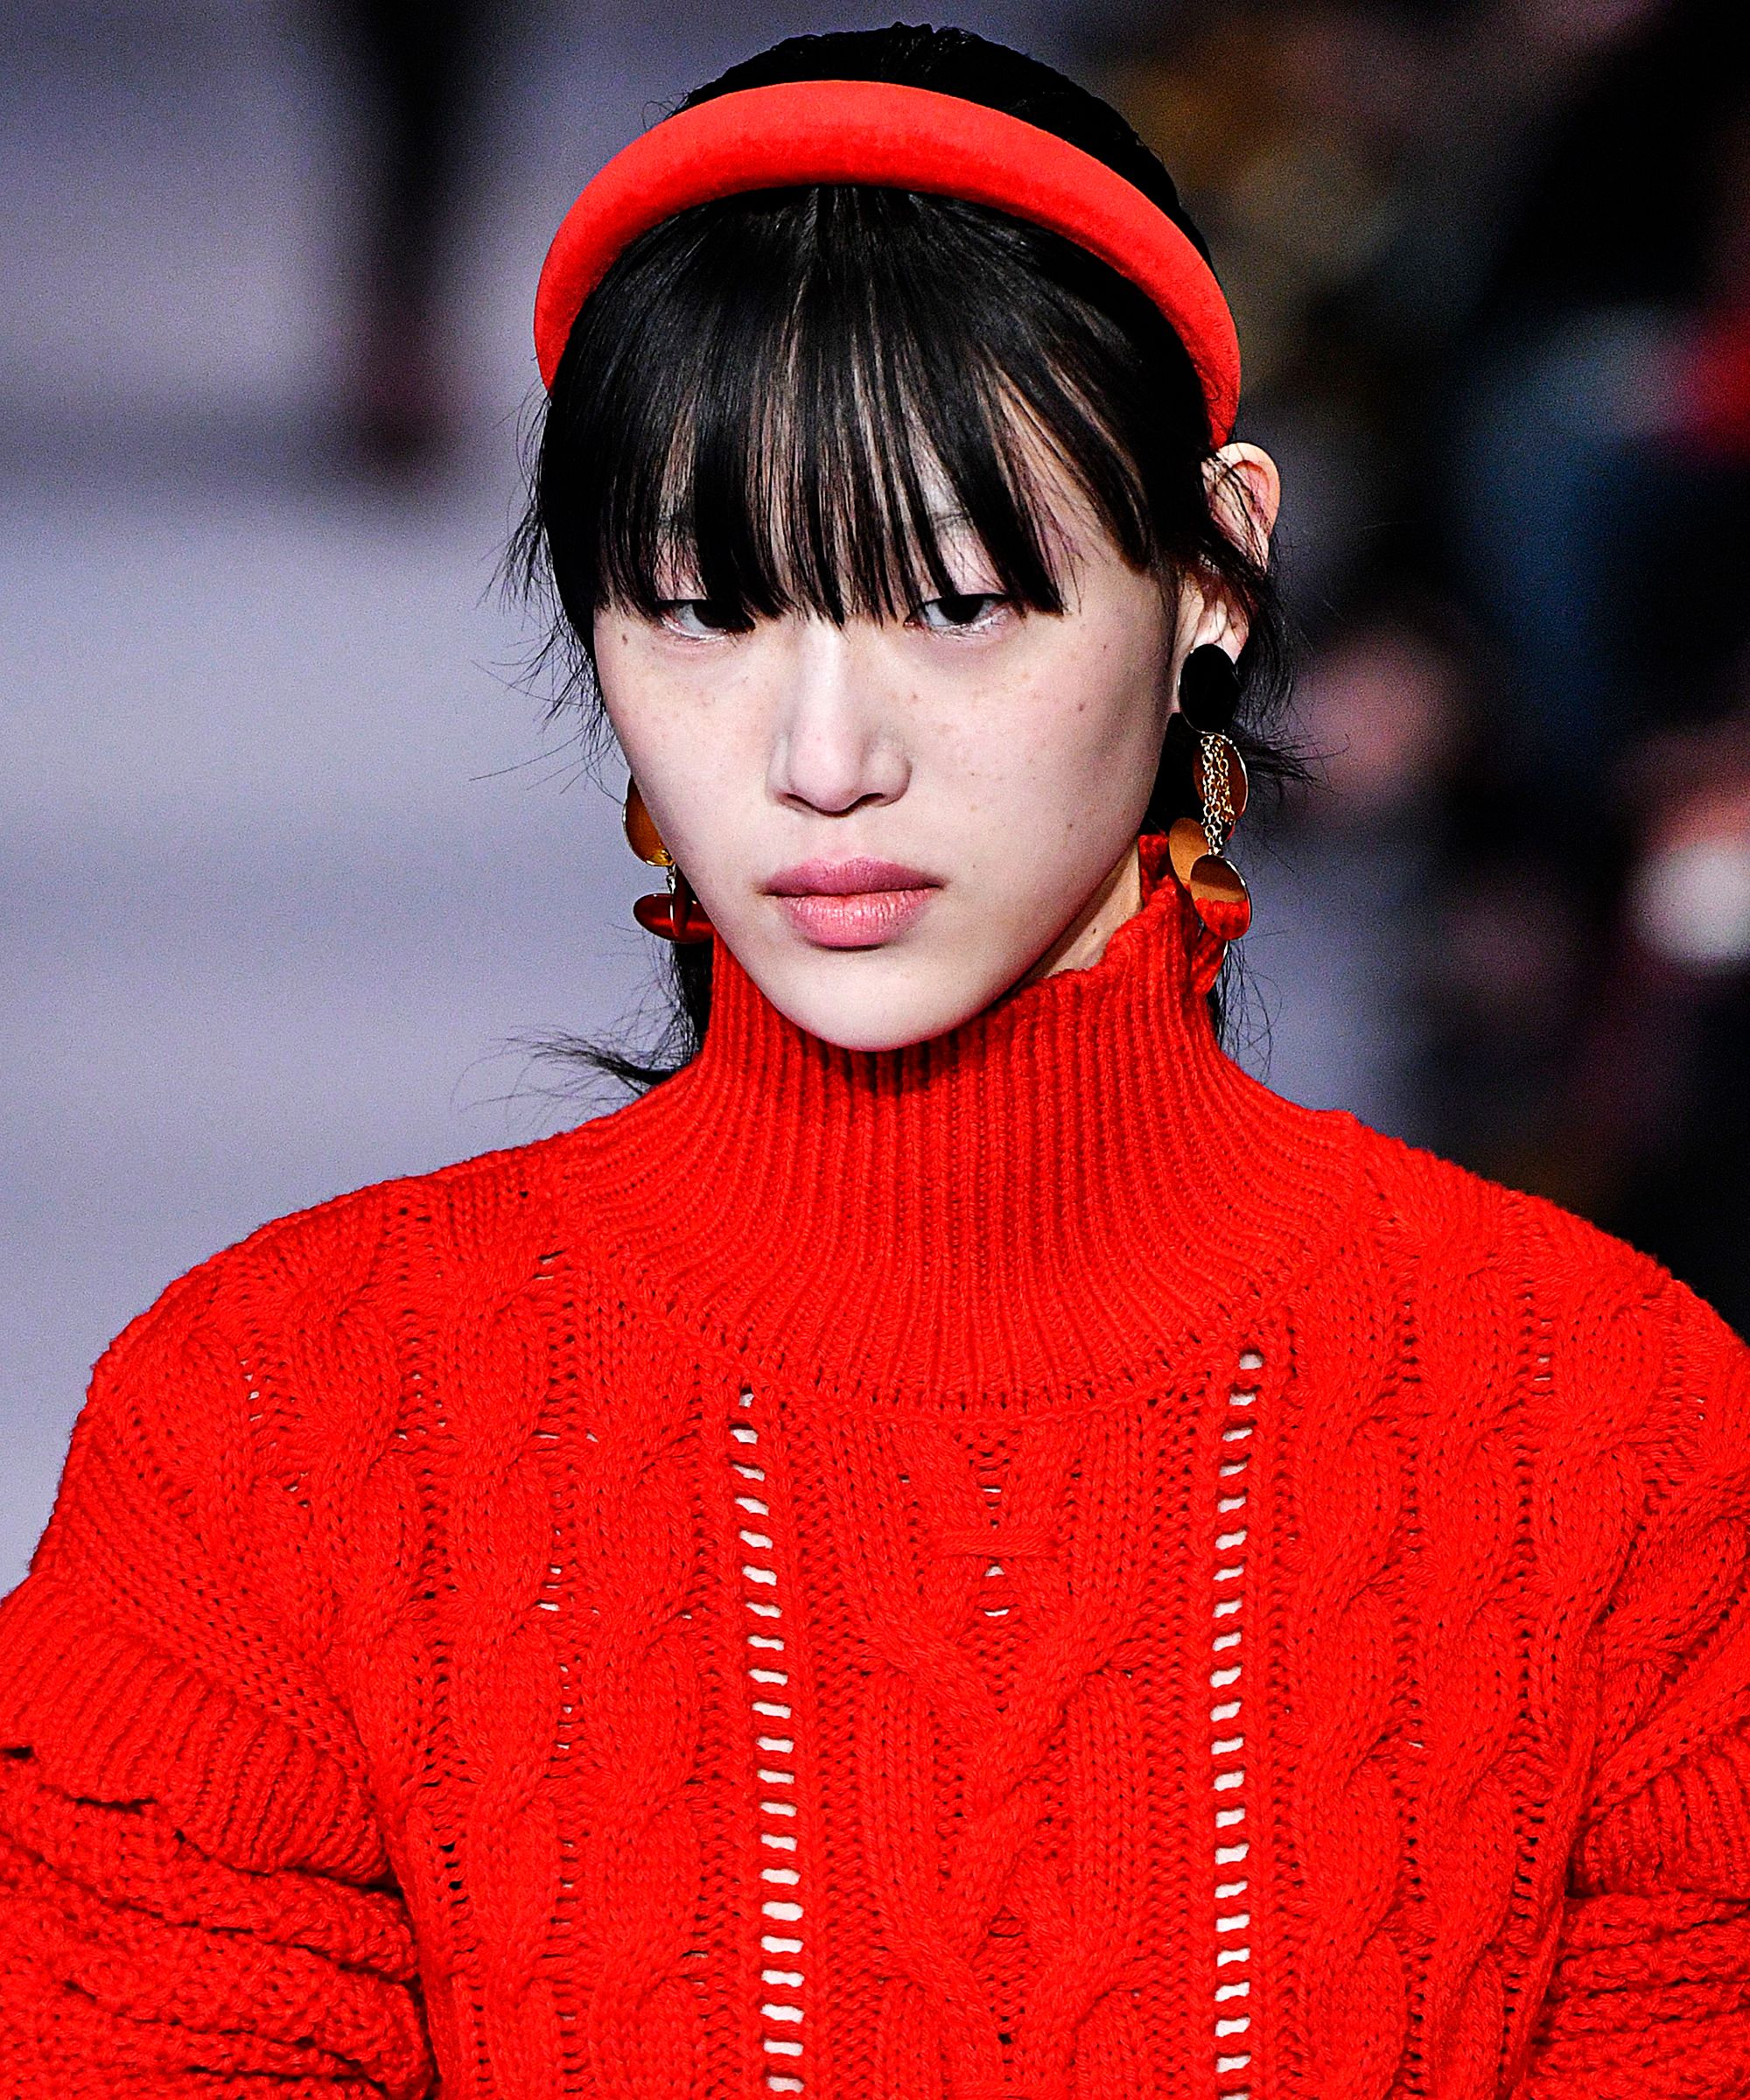 This Model Just Showed Us 11 Ways To Style Bangs | Oye! Times